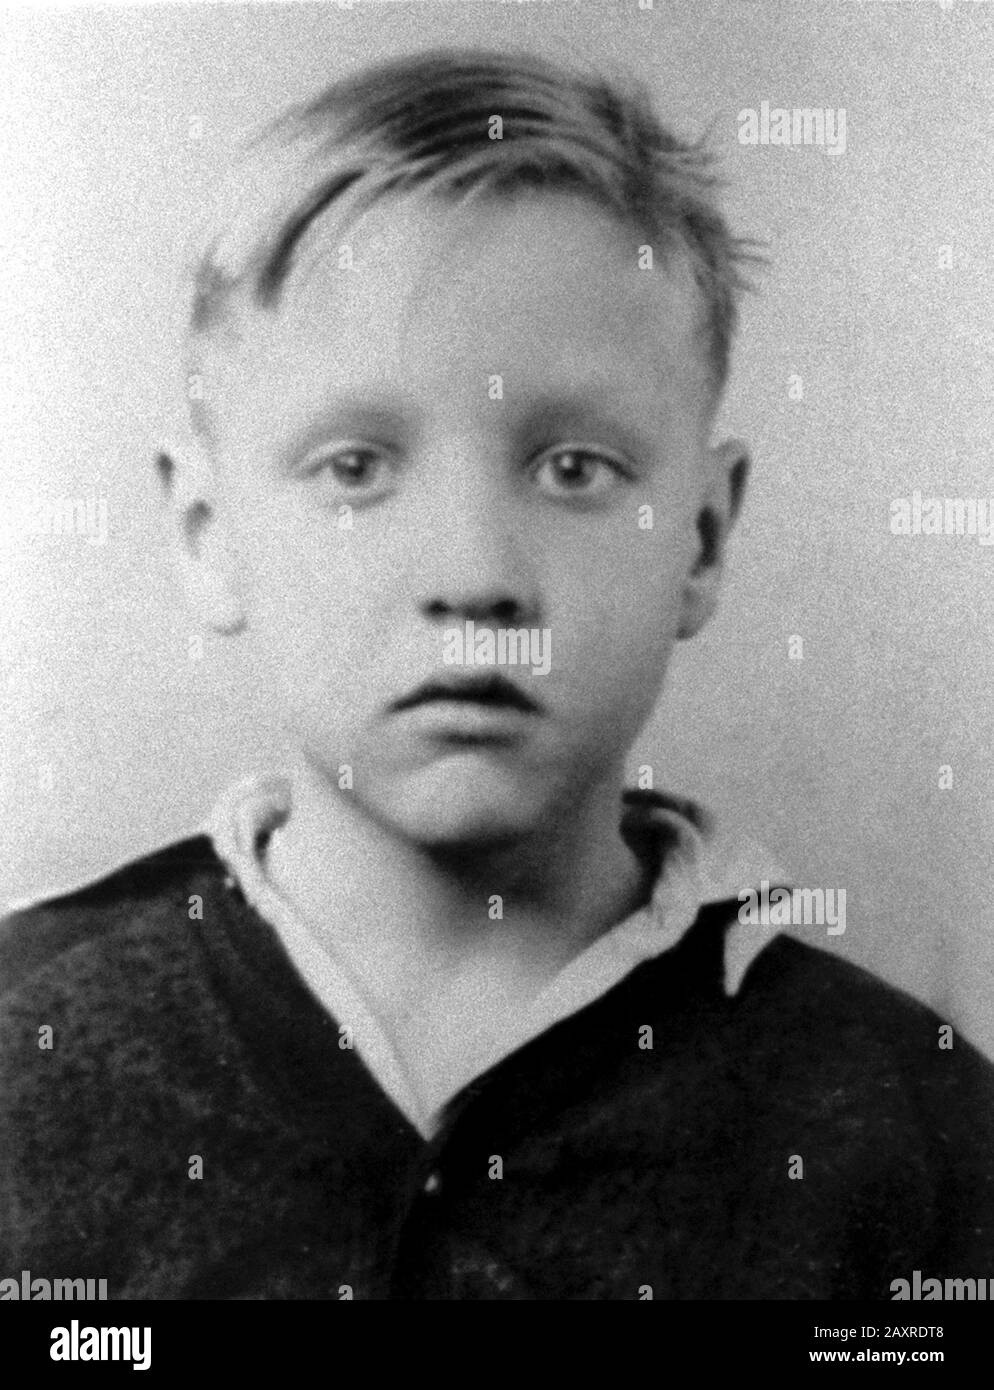 1945 ca, Tupelo, USA : The most celebrated Rock'n Roll singer ELVIS PRESLEY  ( 1935 - 1977 ) when was a young boy . Undentified photographer. - MUSIC -  MUSICA - ROCK -